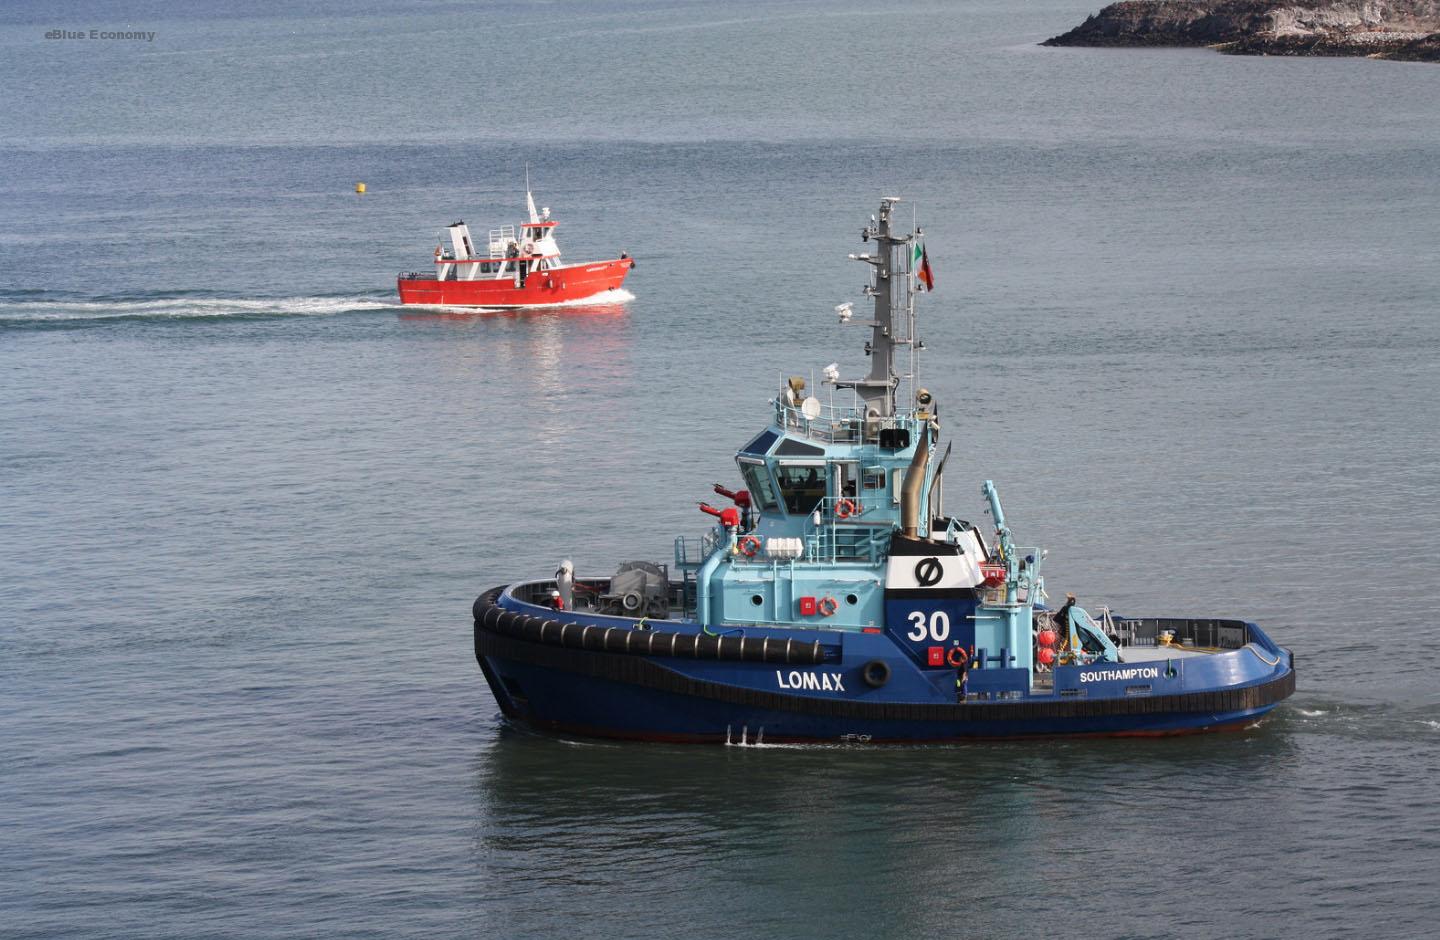 eBlue_economy_Tugs Towing & Offshore Newsletter 07 2022 - PDF